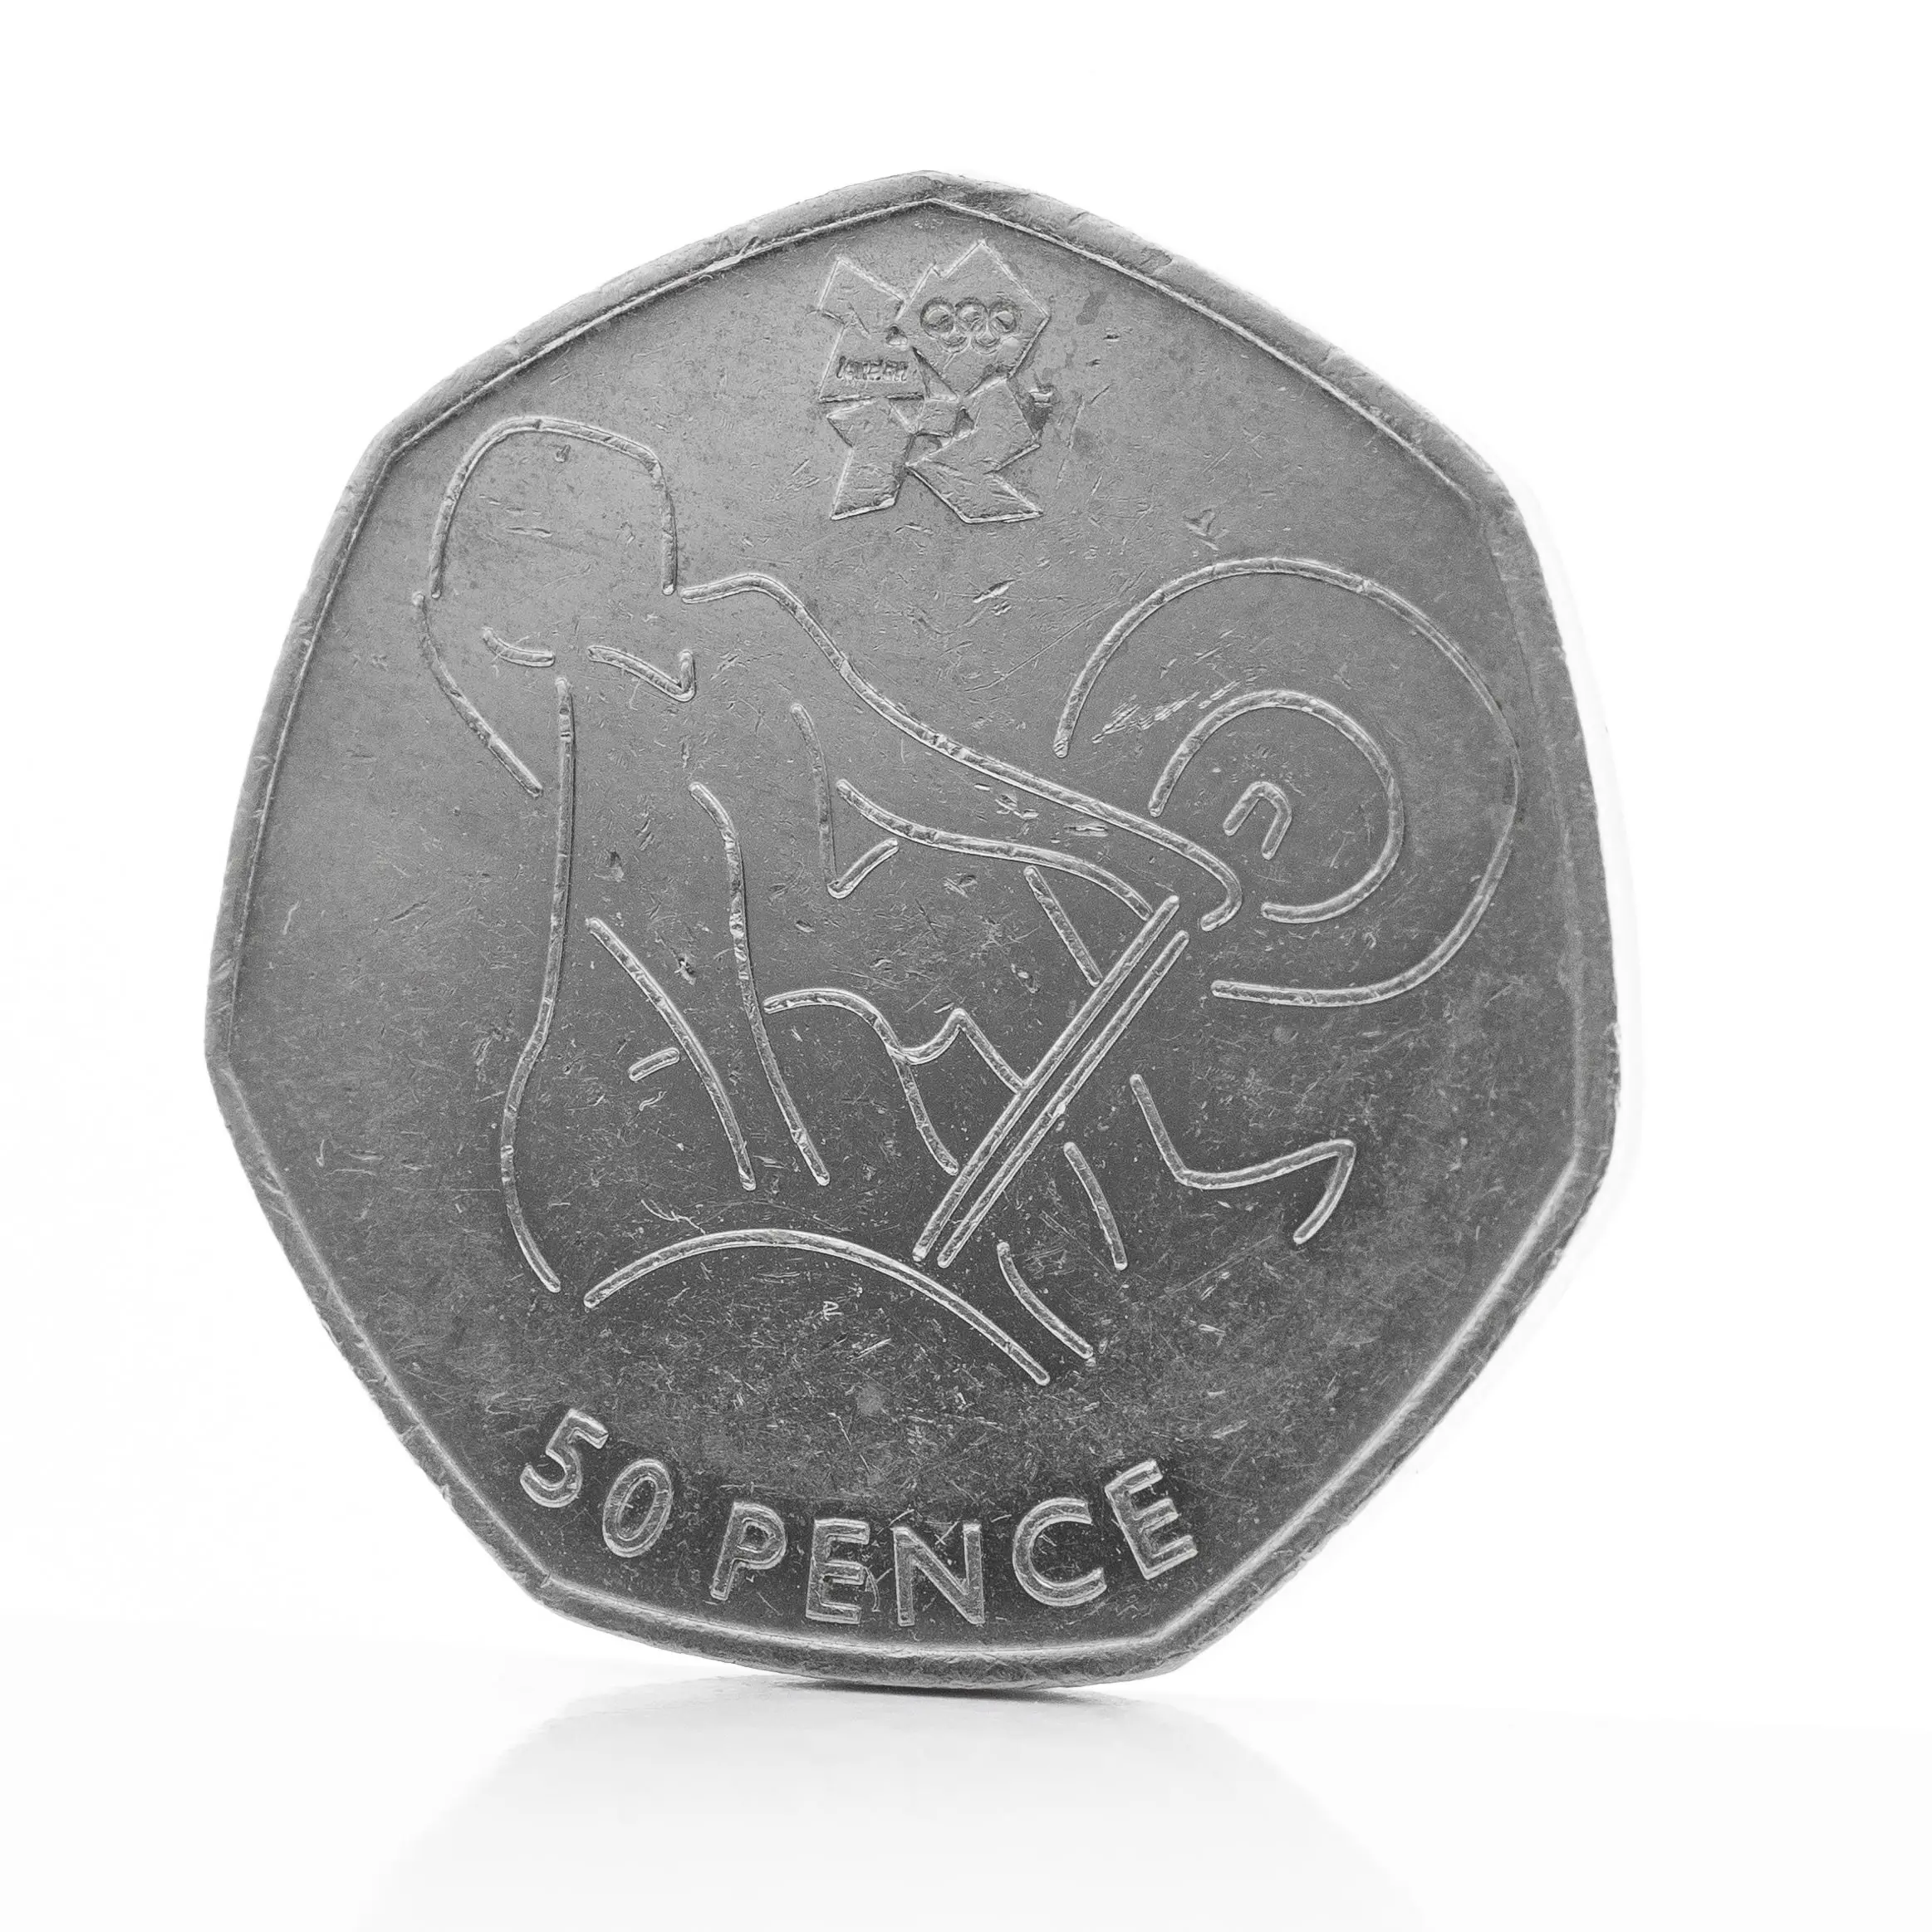 Weightlifting 50p coin design